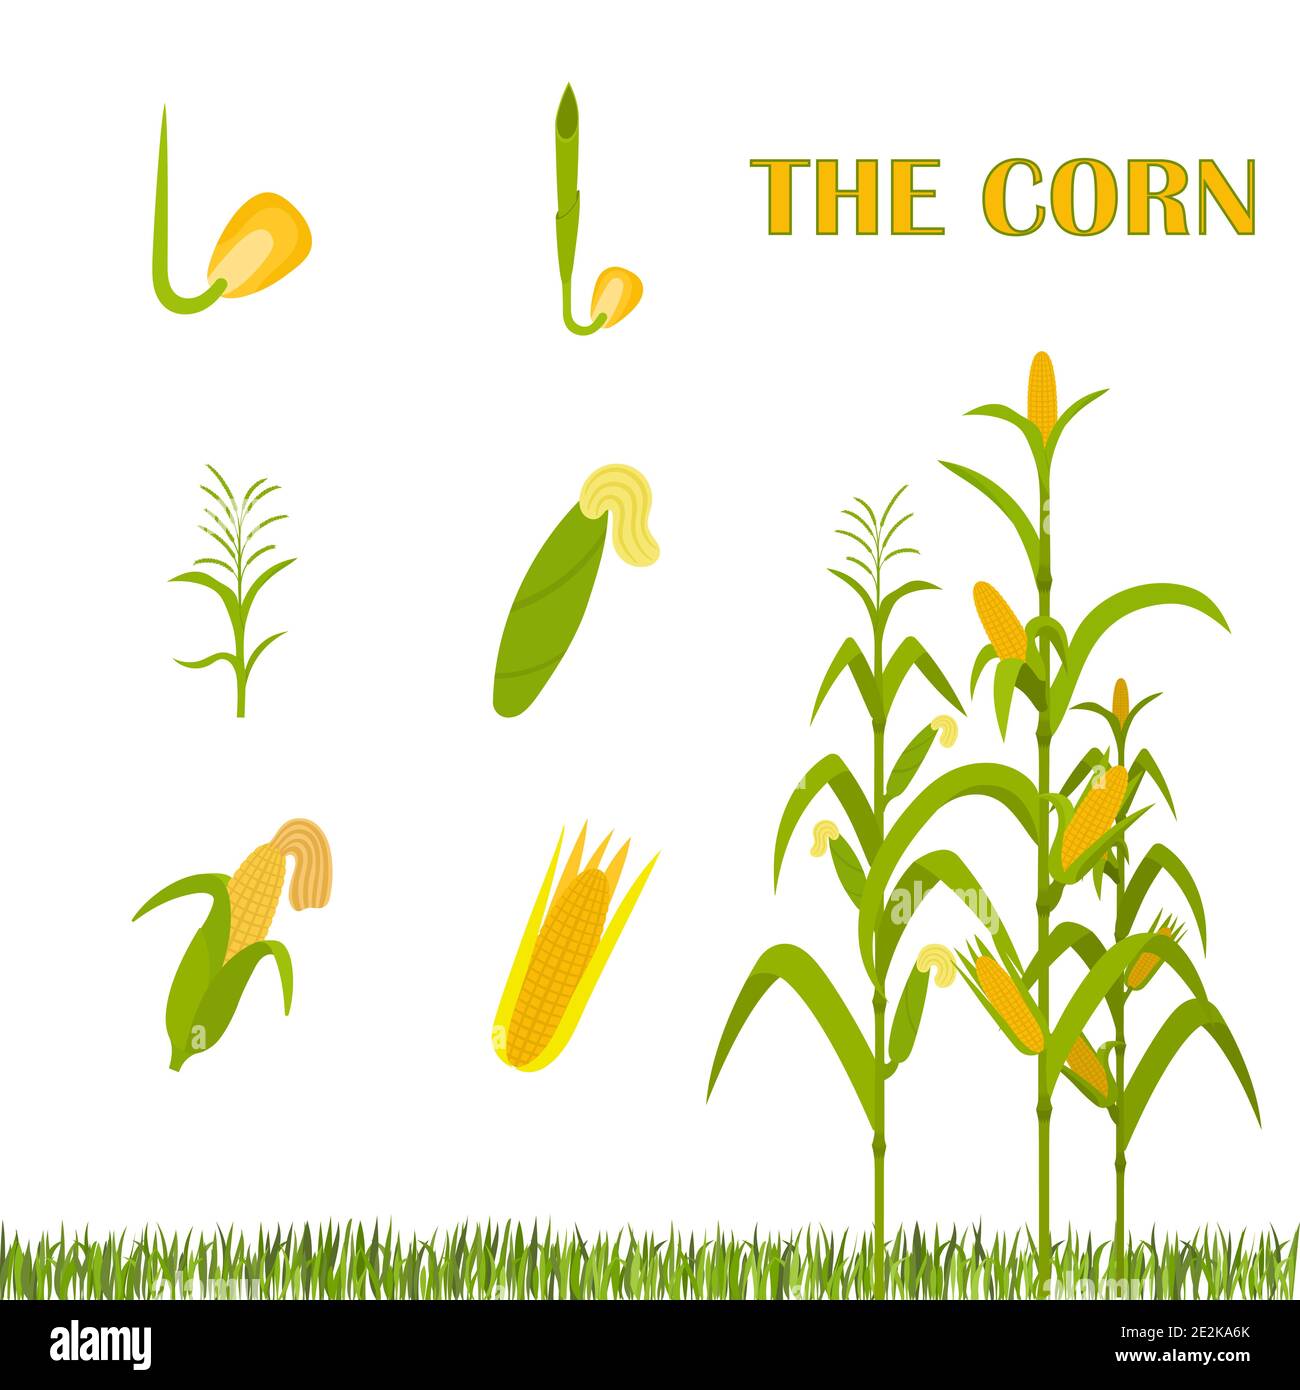 List 98+ Images stages of corn growth pictures Updated